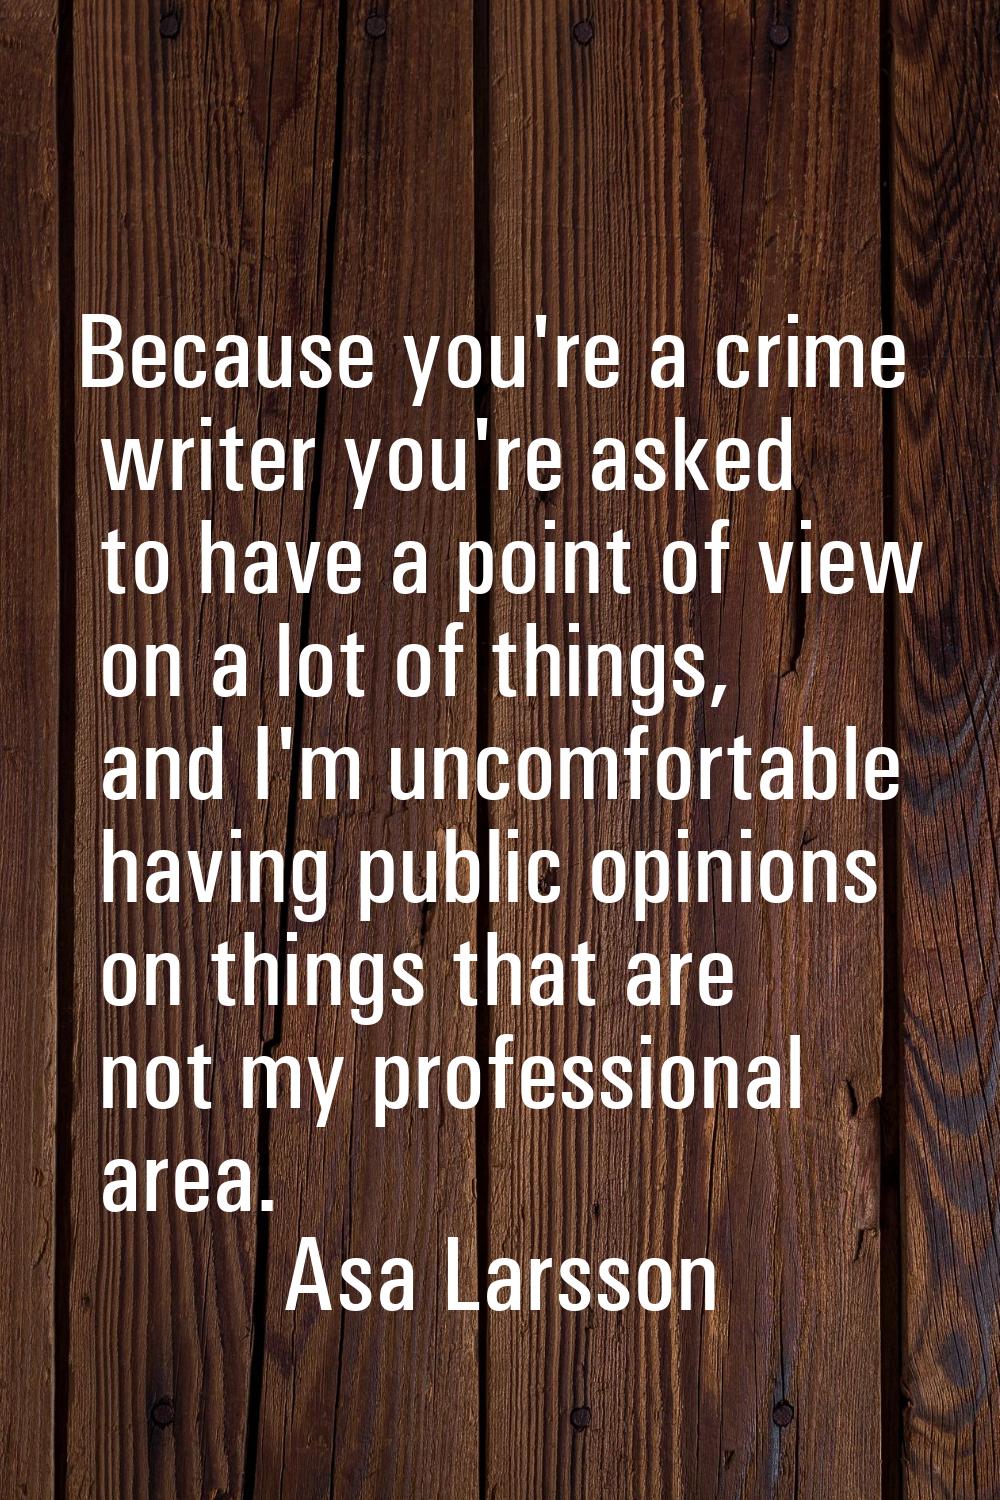 Because you're a crime writer you're asked to have a point of view on a lot of things, and I'm unco